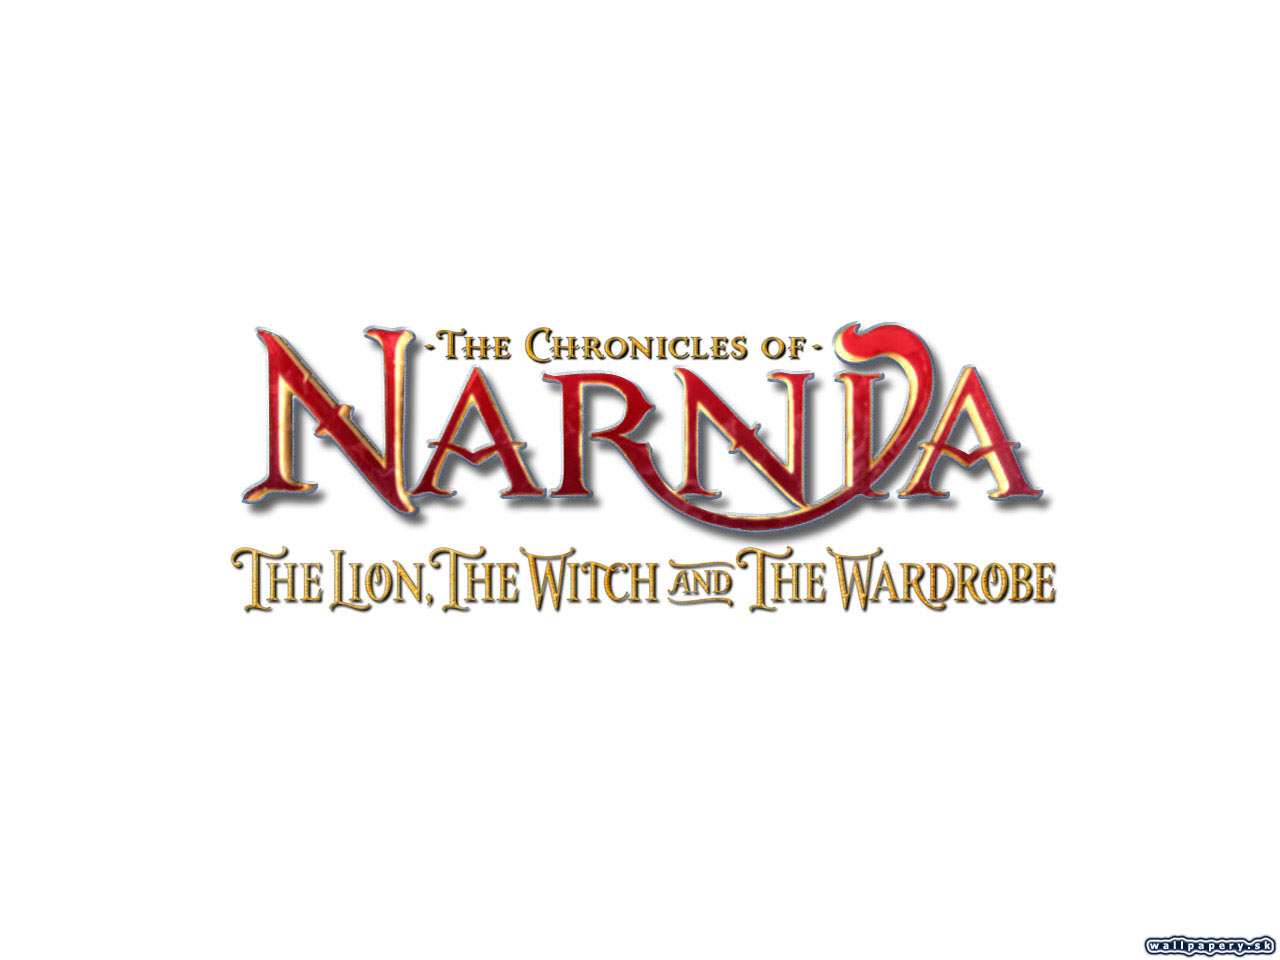 The Chronicles of Narnia: The Lion, The Witch and the Wardrobe - wallpaper 16